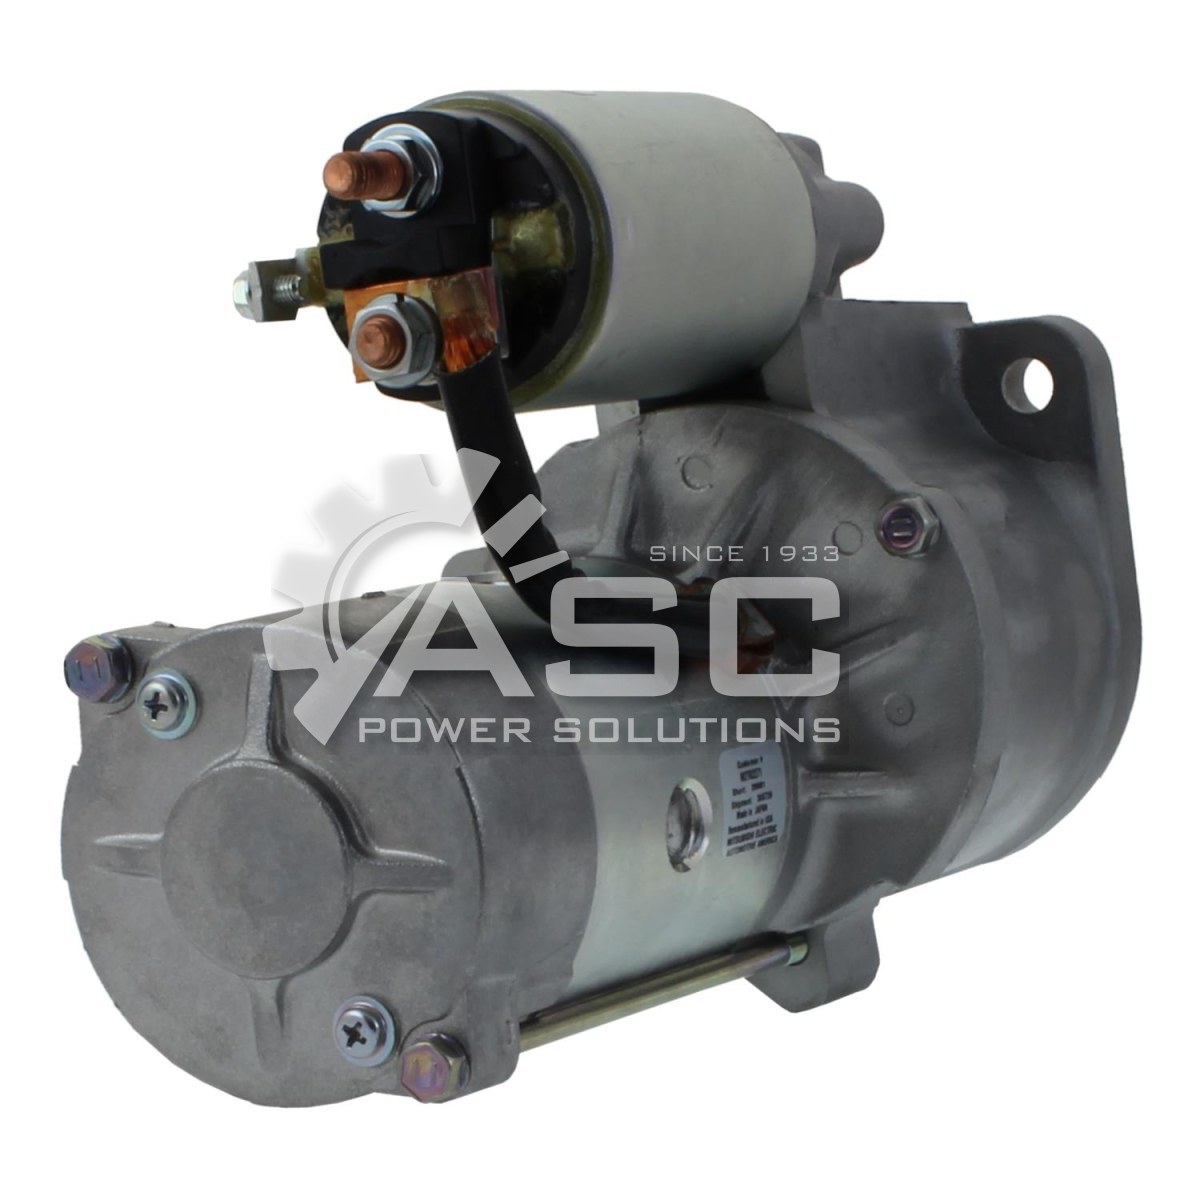 S481306_REMAN ASC POWER SOLUTIONS MITSUBISHI STARER FOR CATERPILLAR & CLARK 12V 10 TOOTH CLOCKWISE 2.2KW 1039827